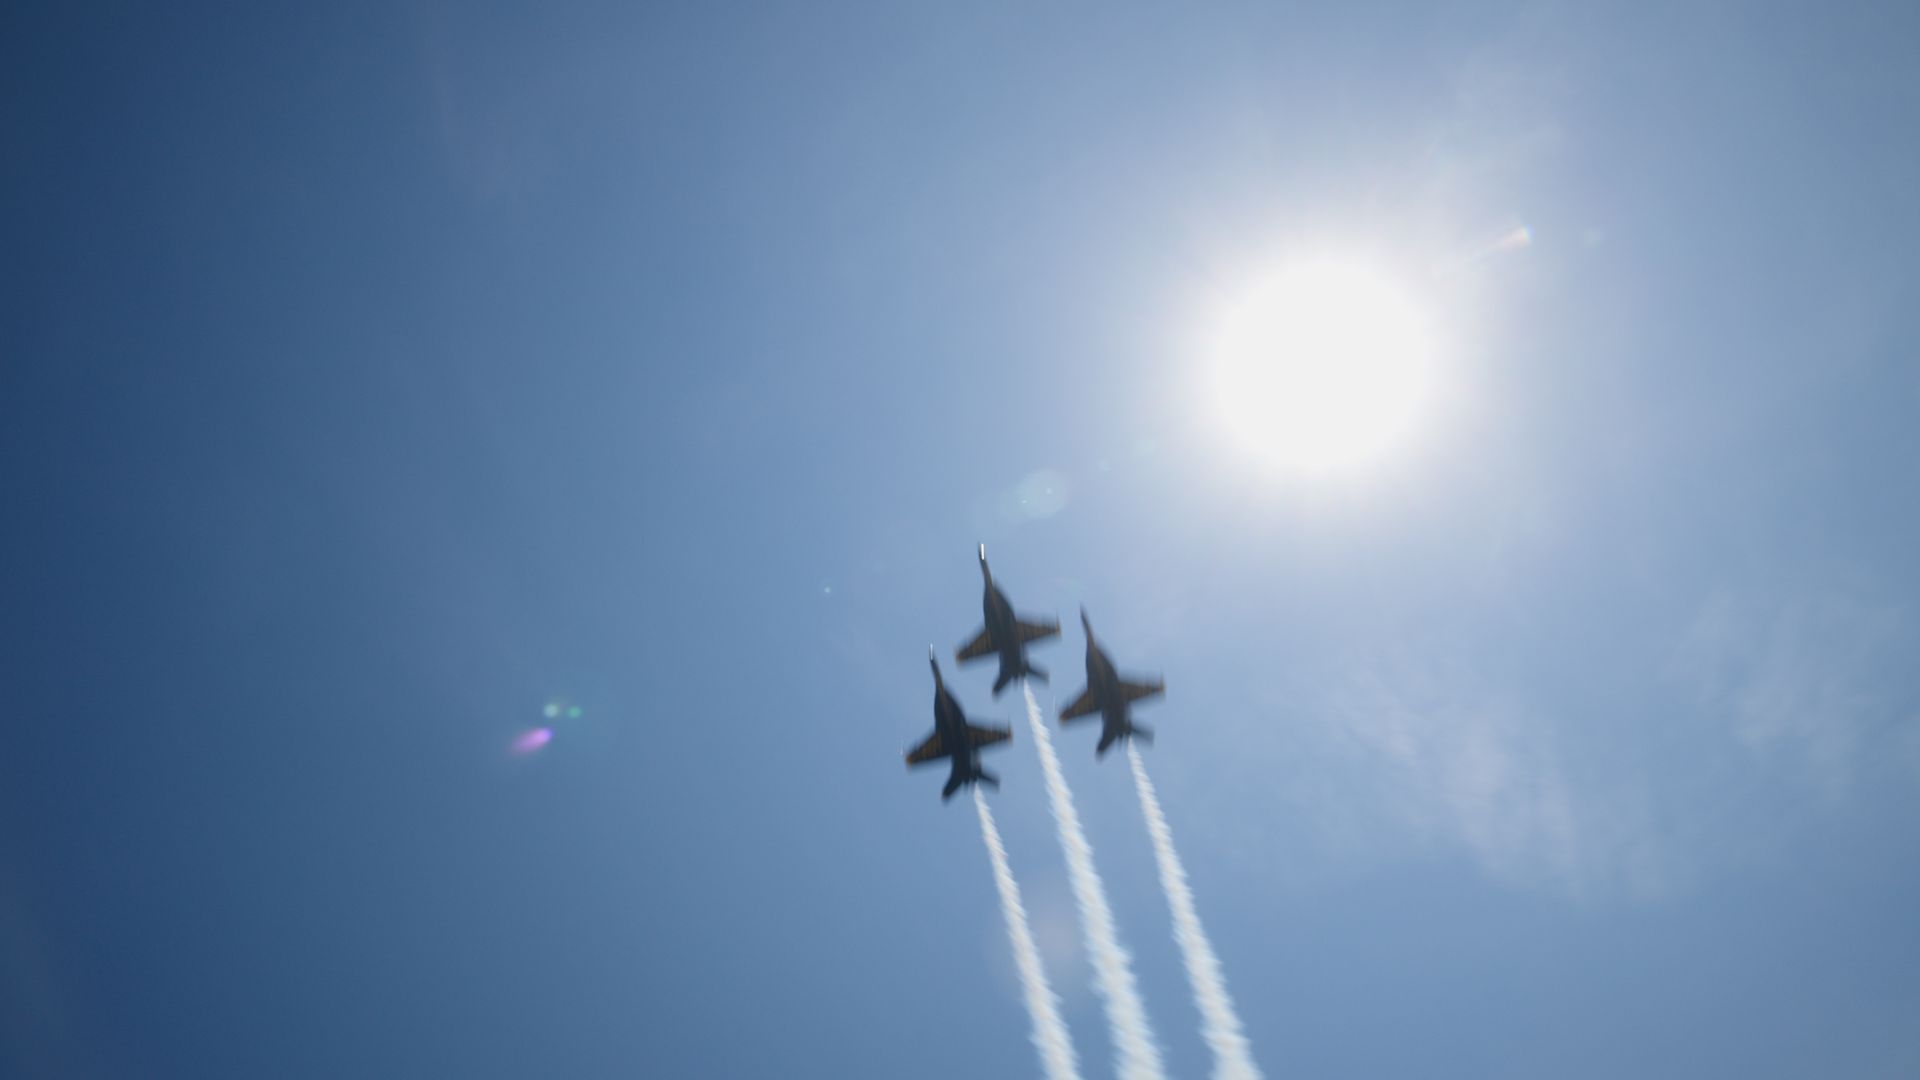 The Blue Angels soared over the Naval Academy, a yearly performance that takes place as part of commissioning week.